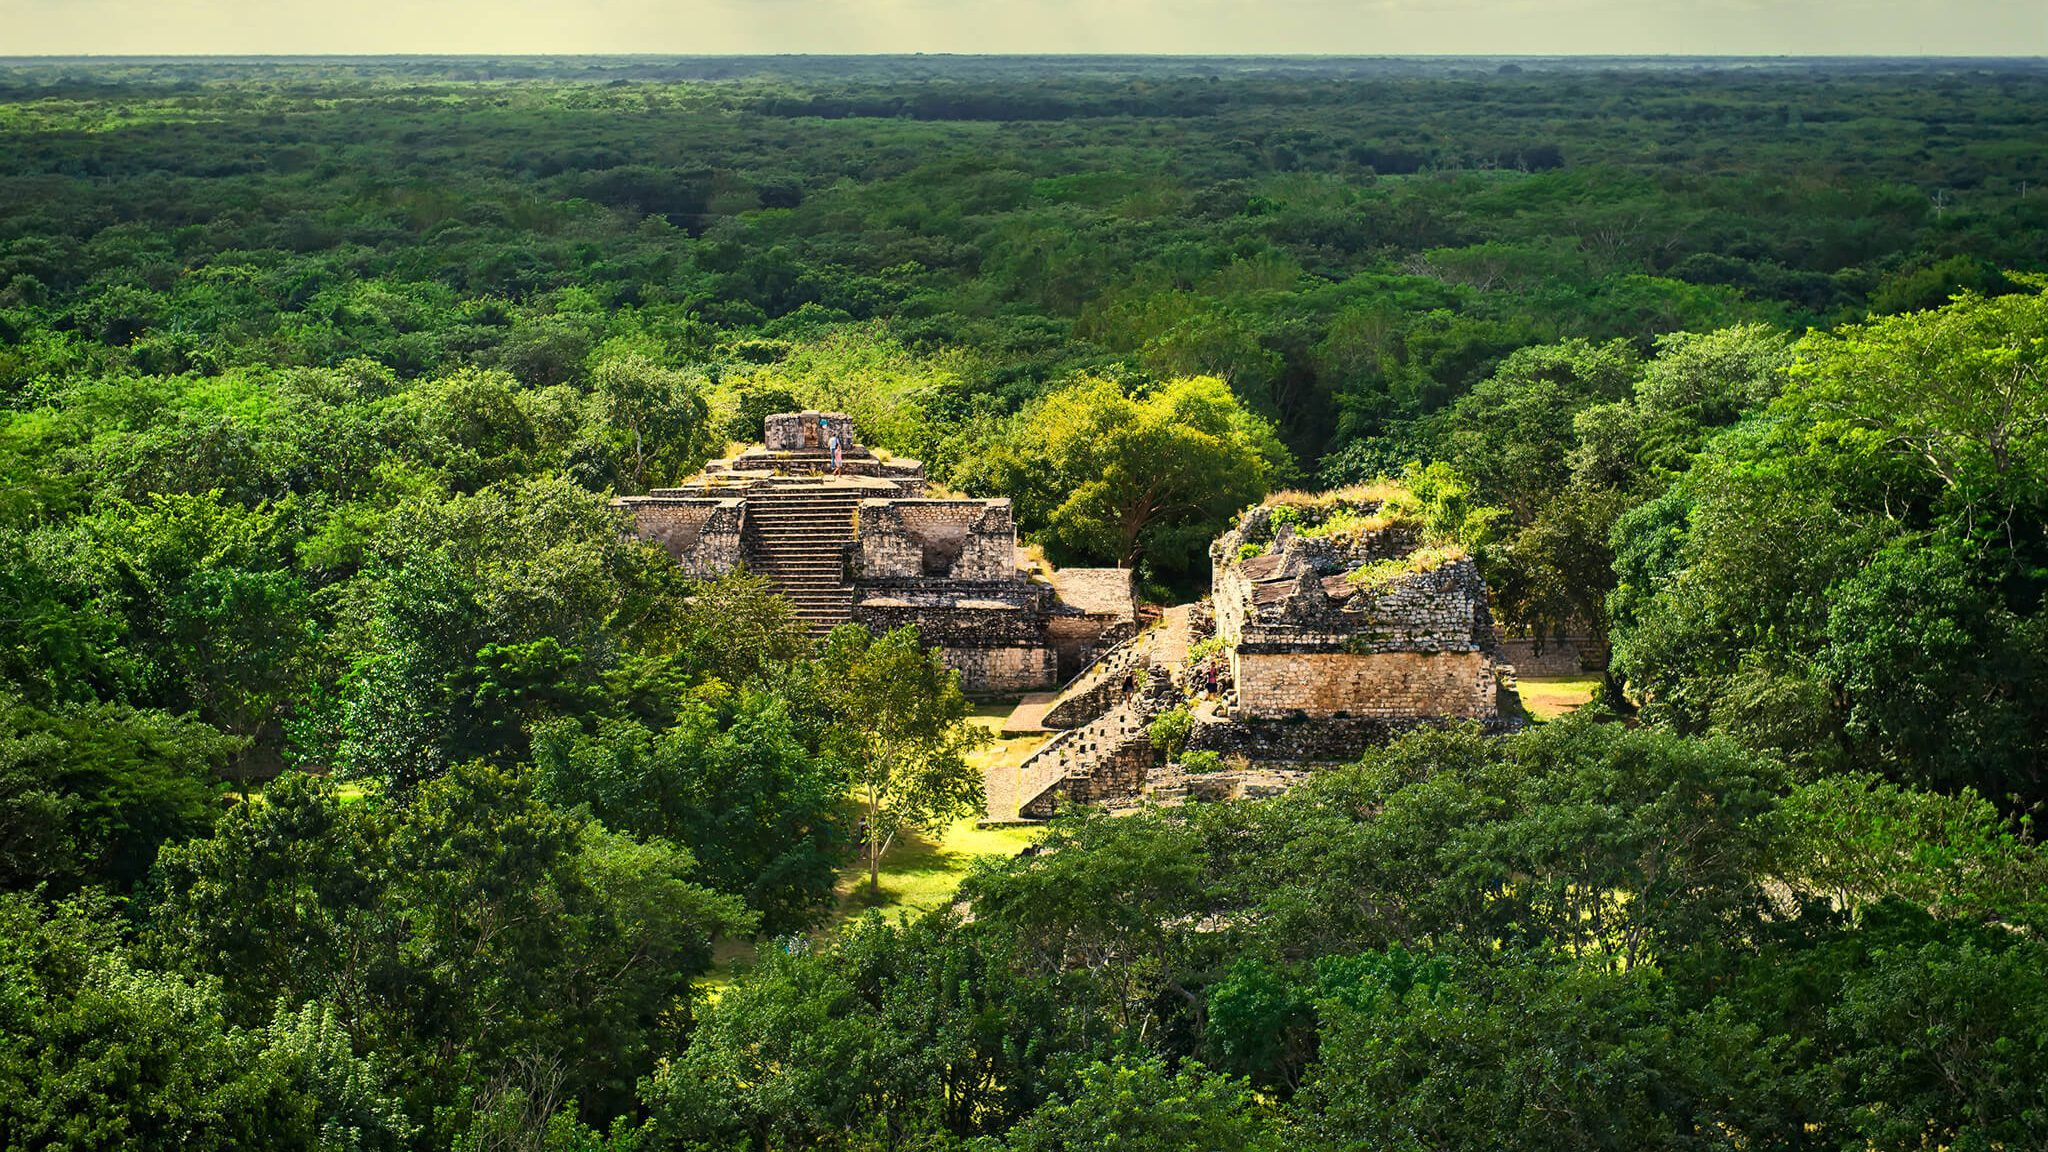 NCKRI Research made national geographic for their findings in Balamku, Yucatan, Mexico caves.